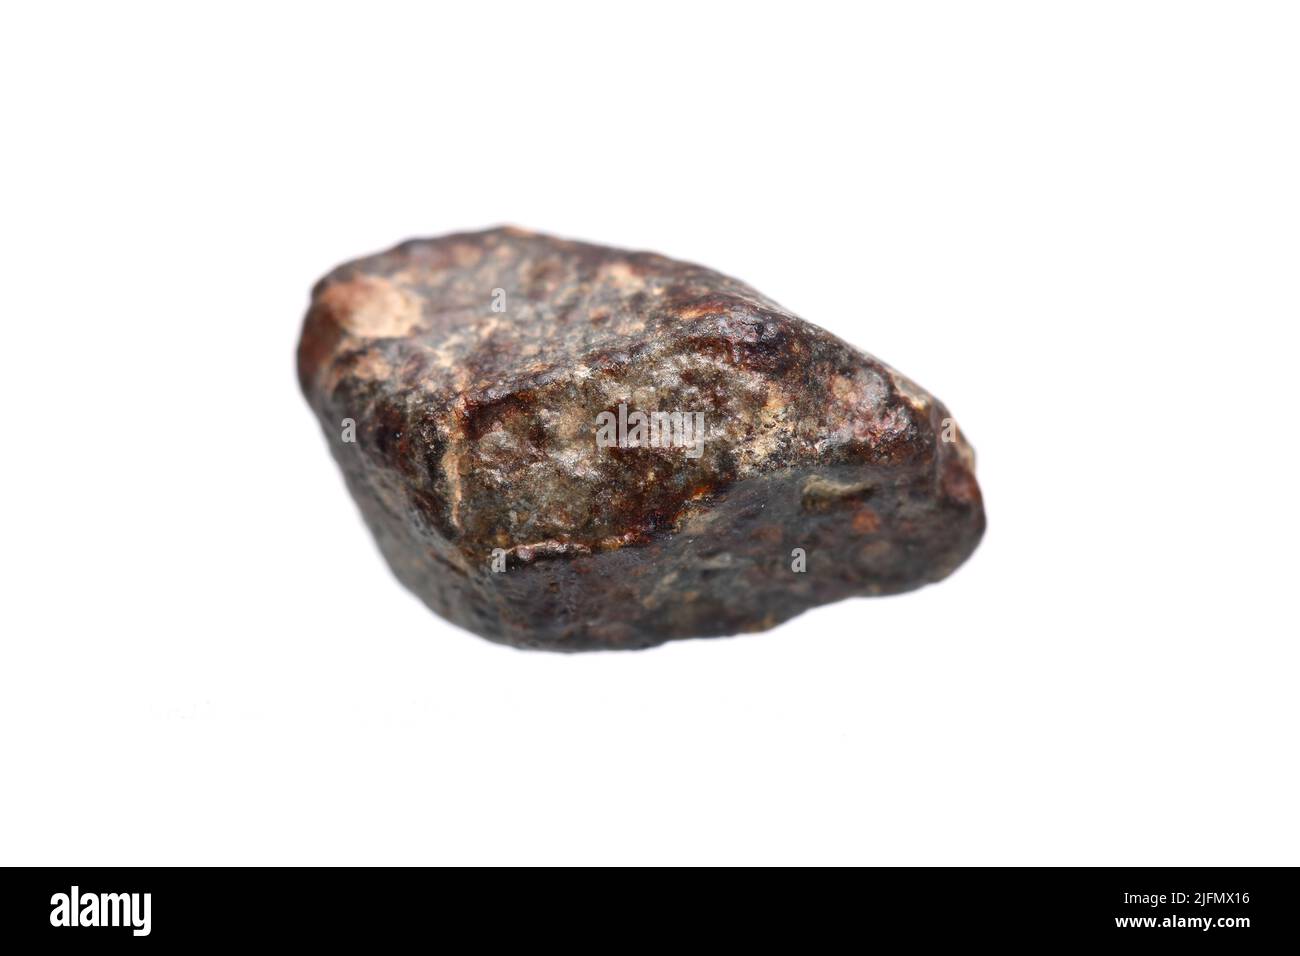 Chondrite meteorite (L-subtype) on white background show some metal flake on the surface (shallow DOF) Stock Photo